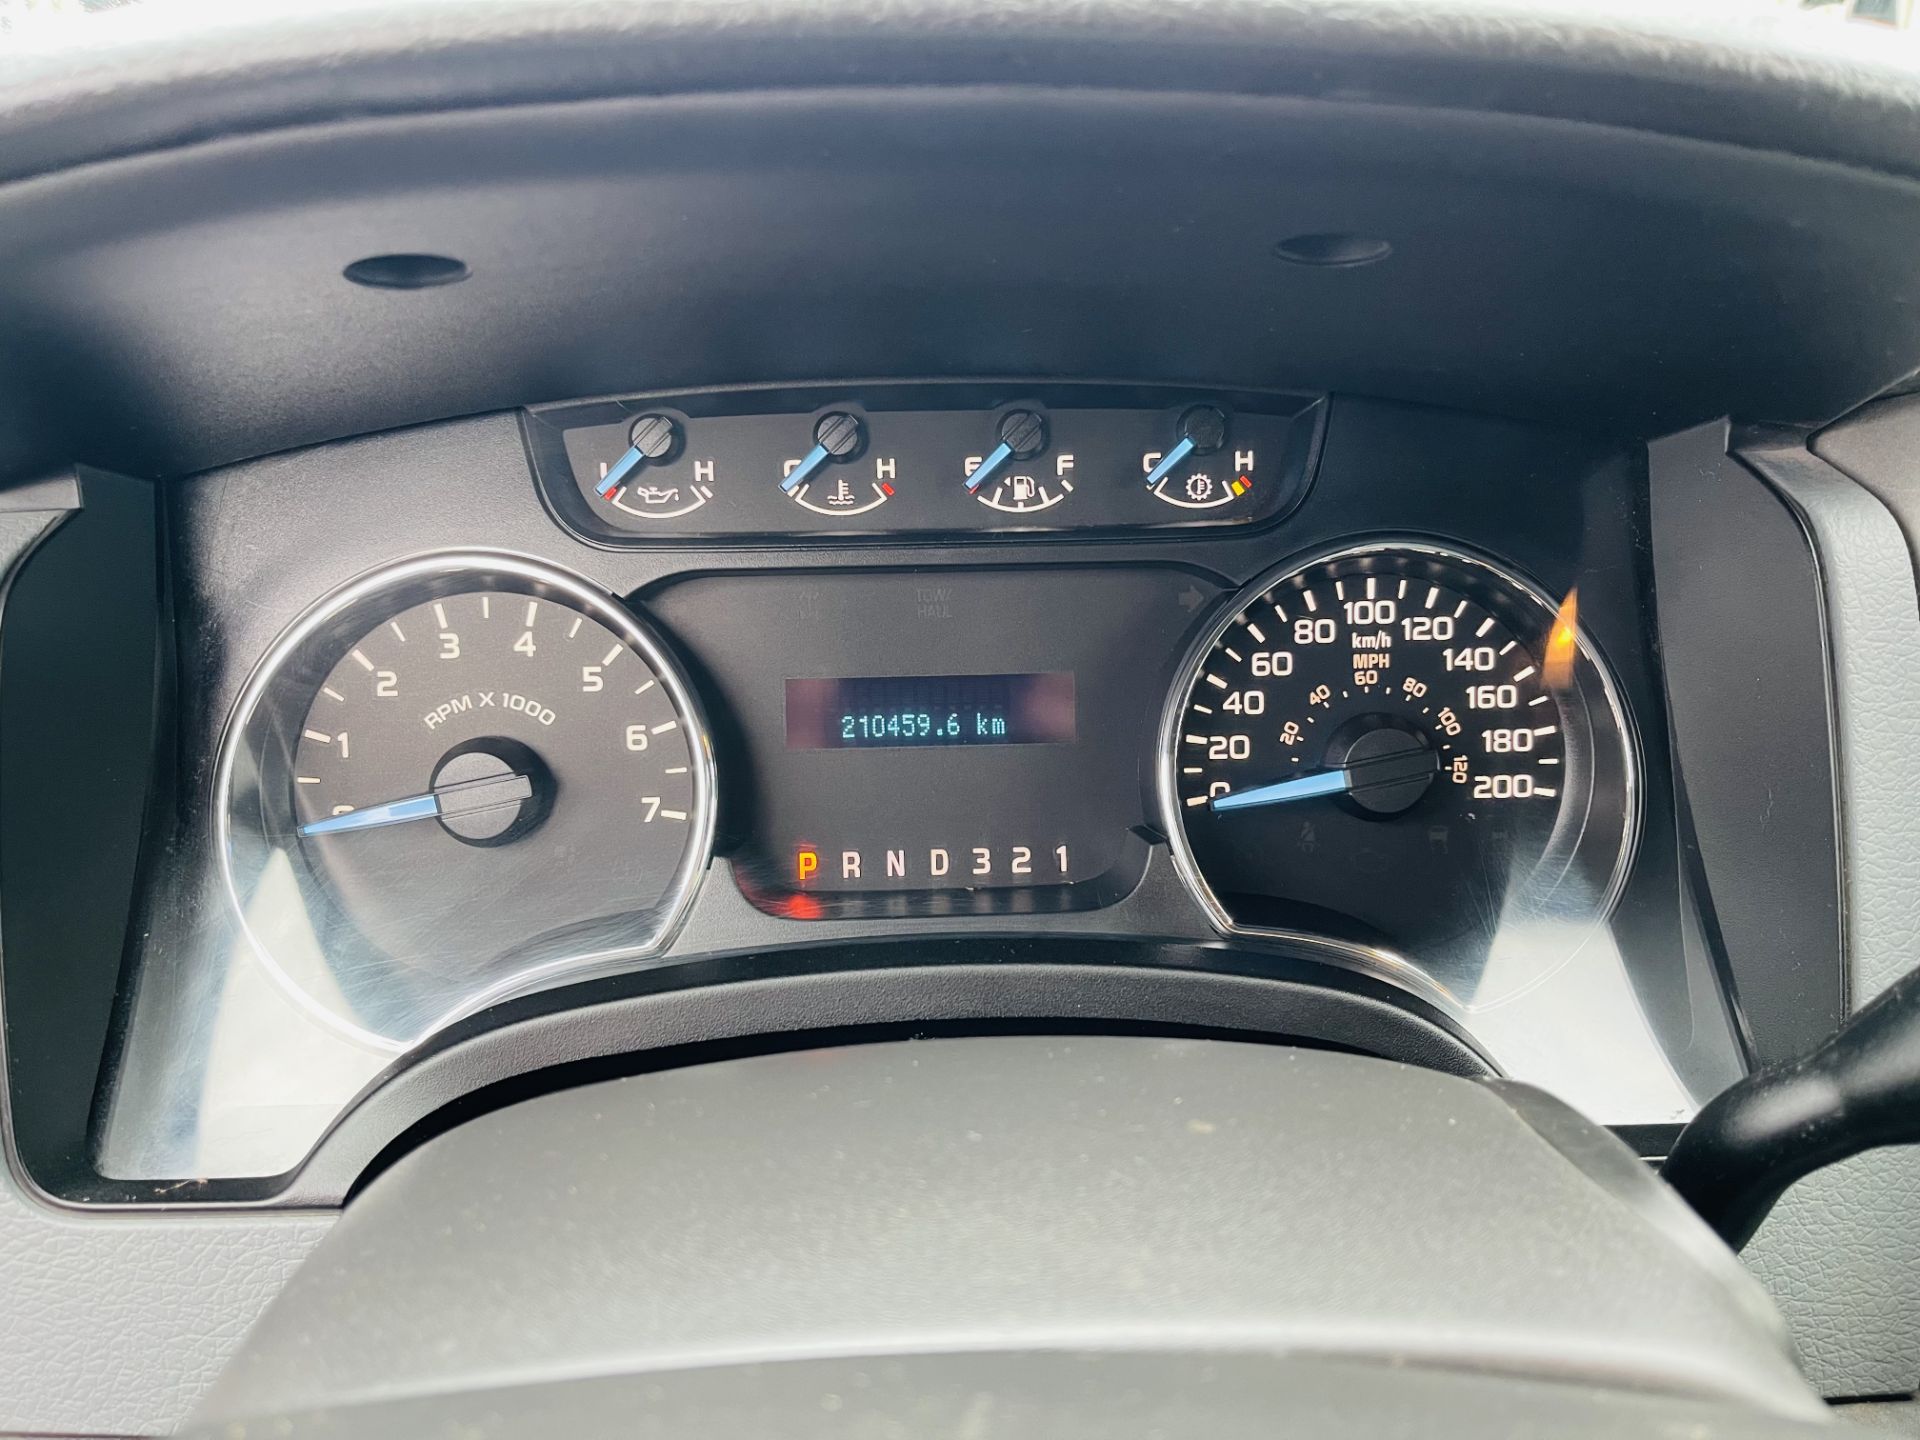 Ford F-150 3.7L V6 XLT Edition Super-Crew '2012 Year' A/C - Cruise Control - Chrome Pack - Image 18 of 32